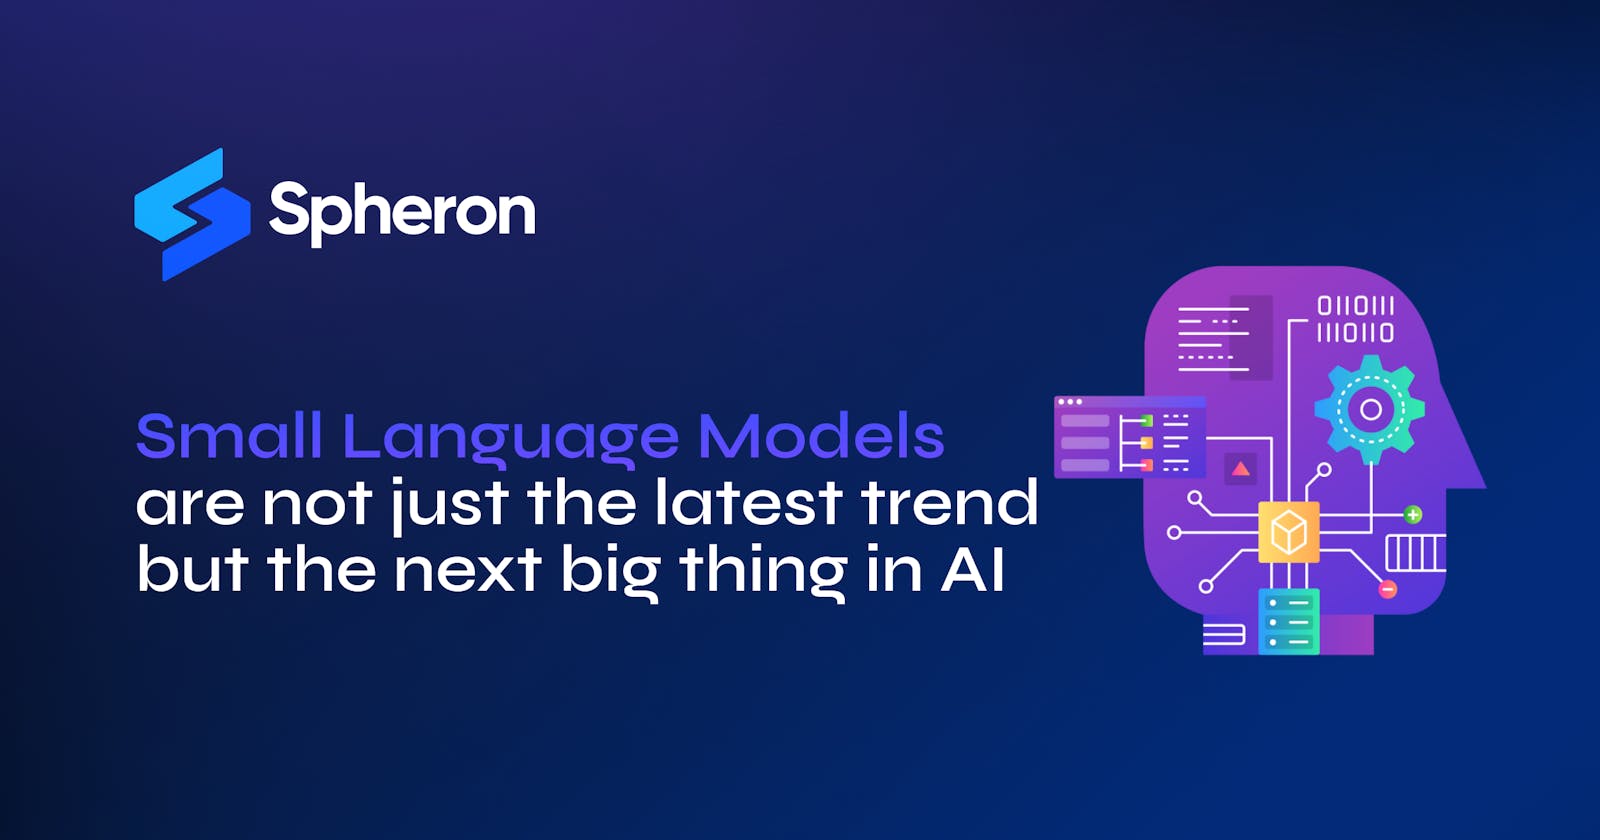 Small language models are not just the latest trend but the next big thing in AI